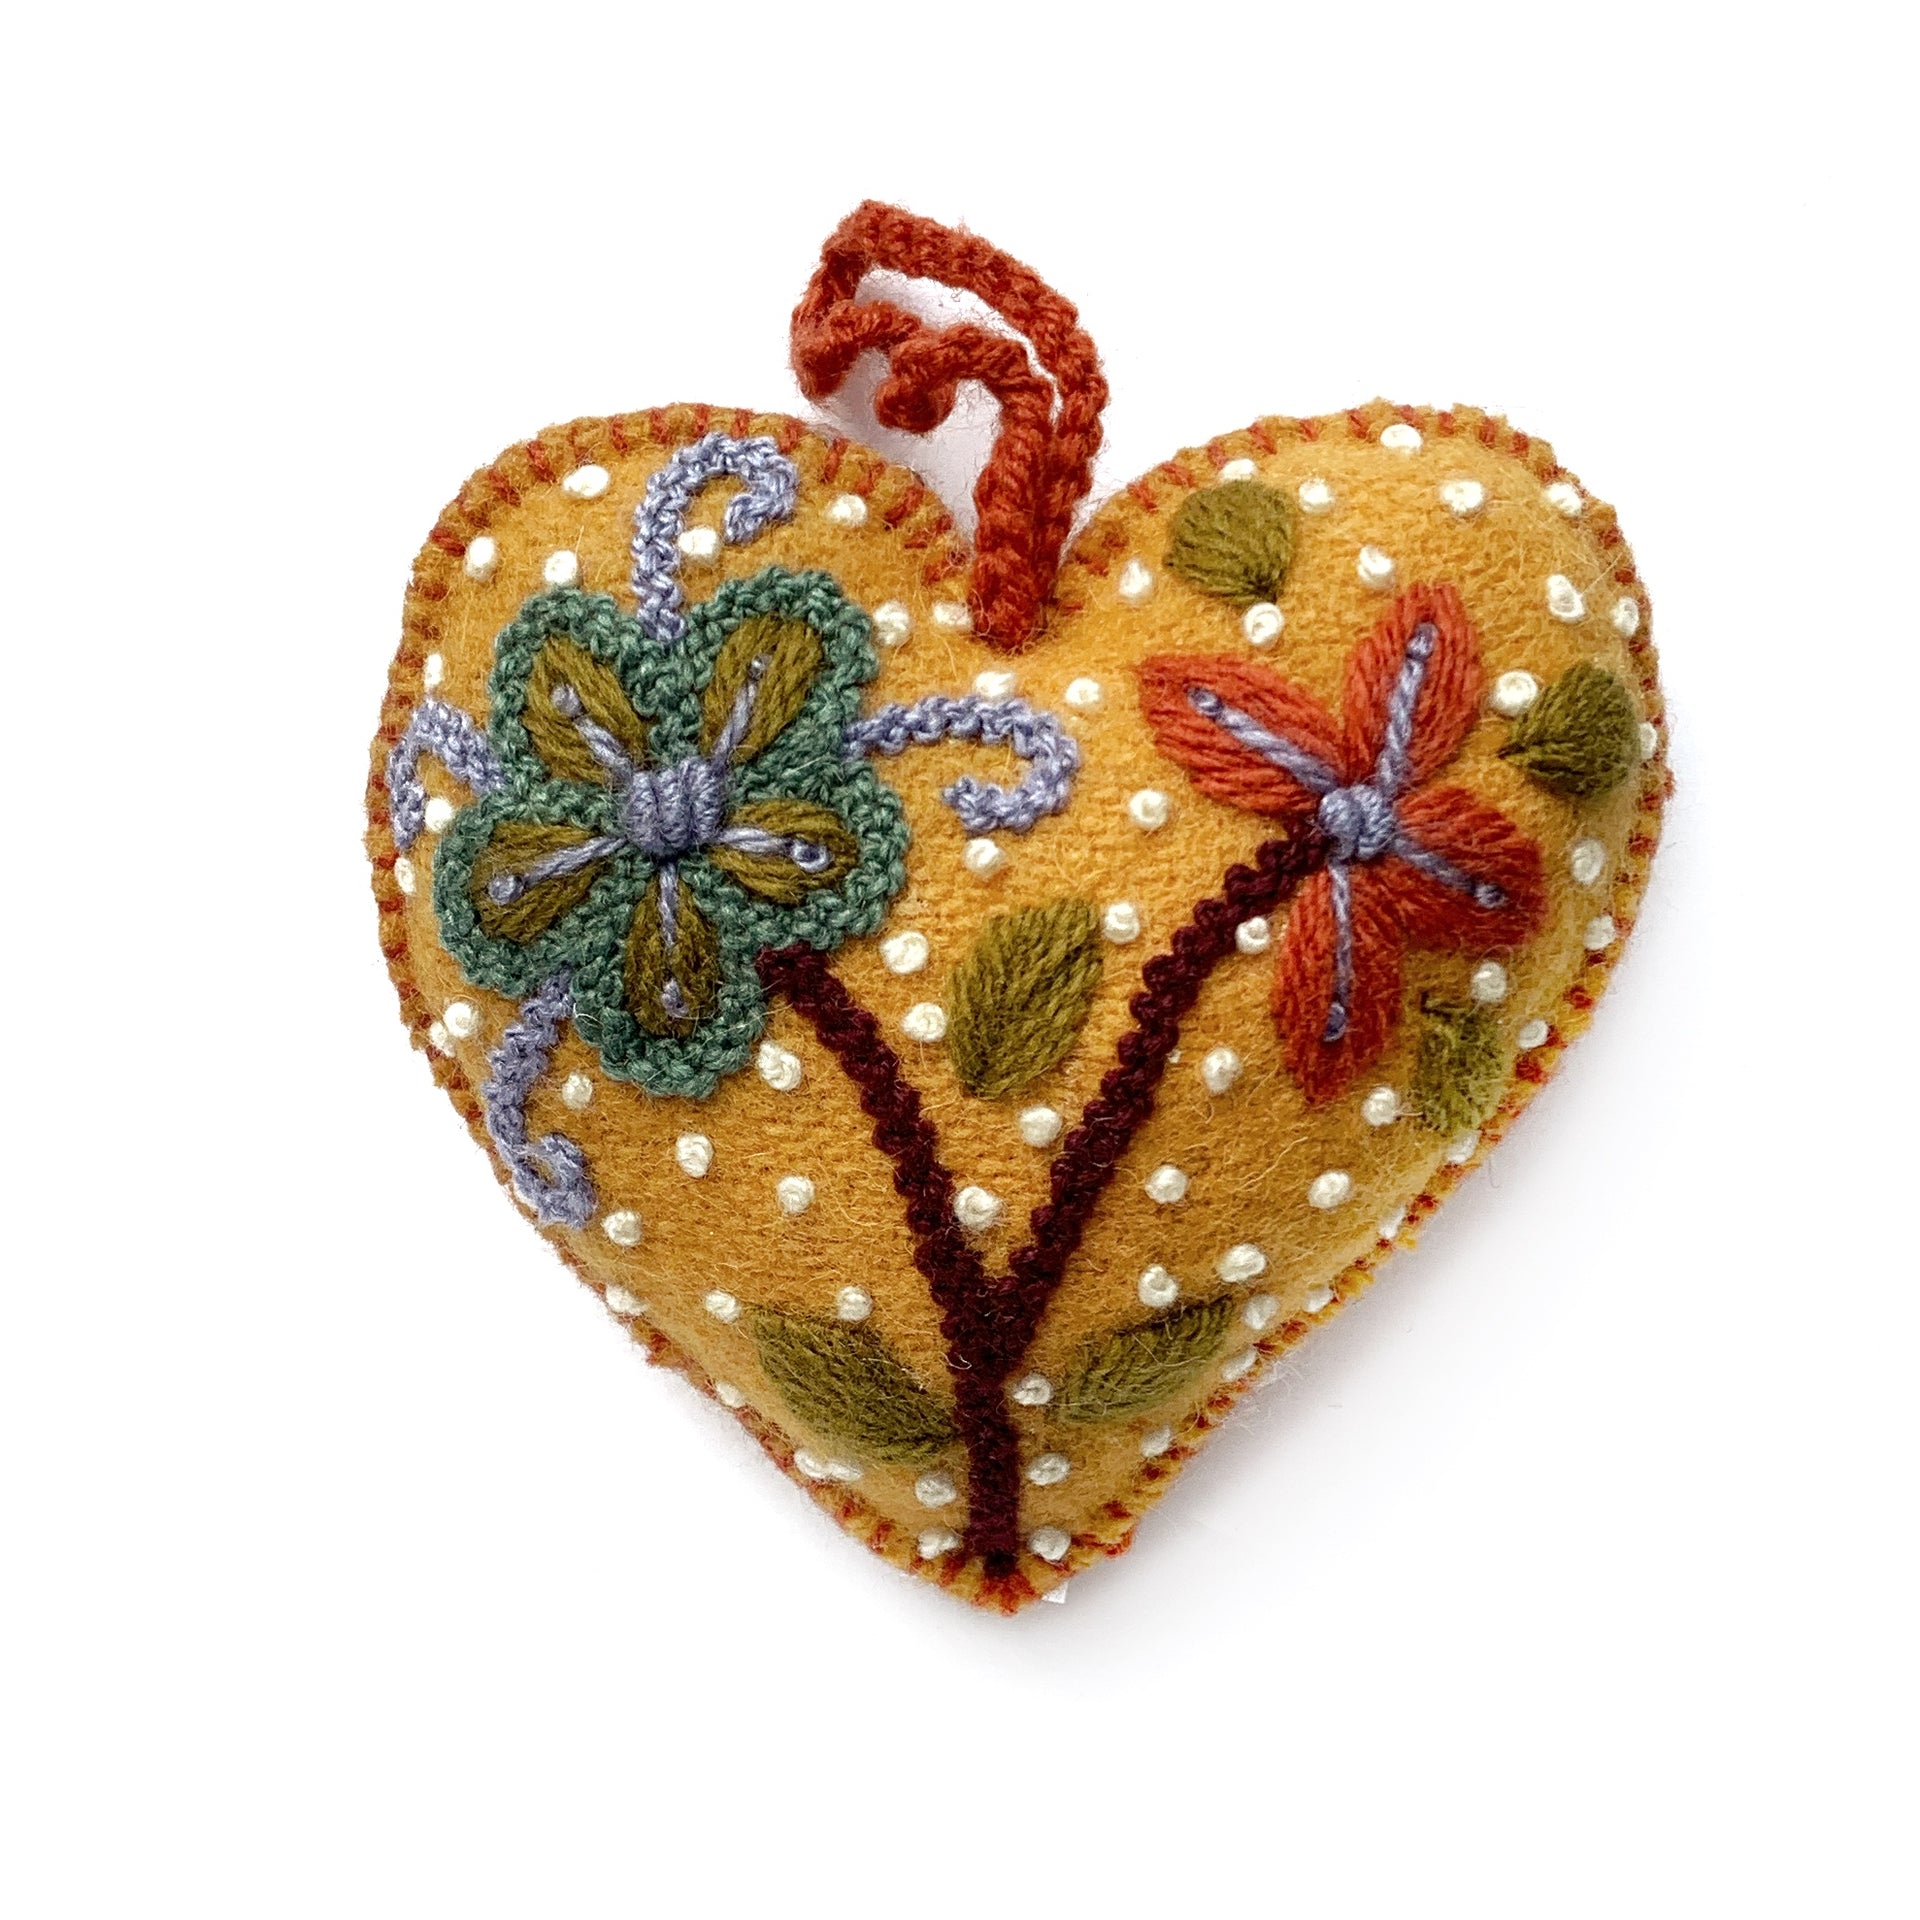 Mustard Heart Christmas Ornament Embroidered Wool Fair Trade